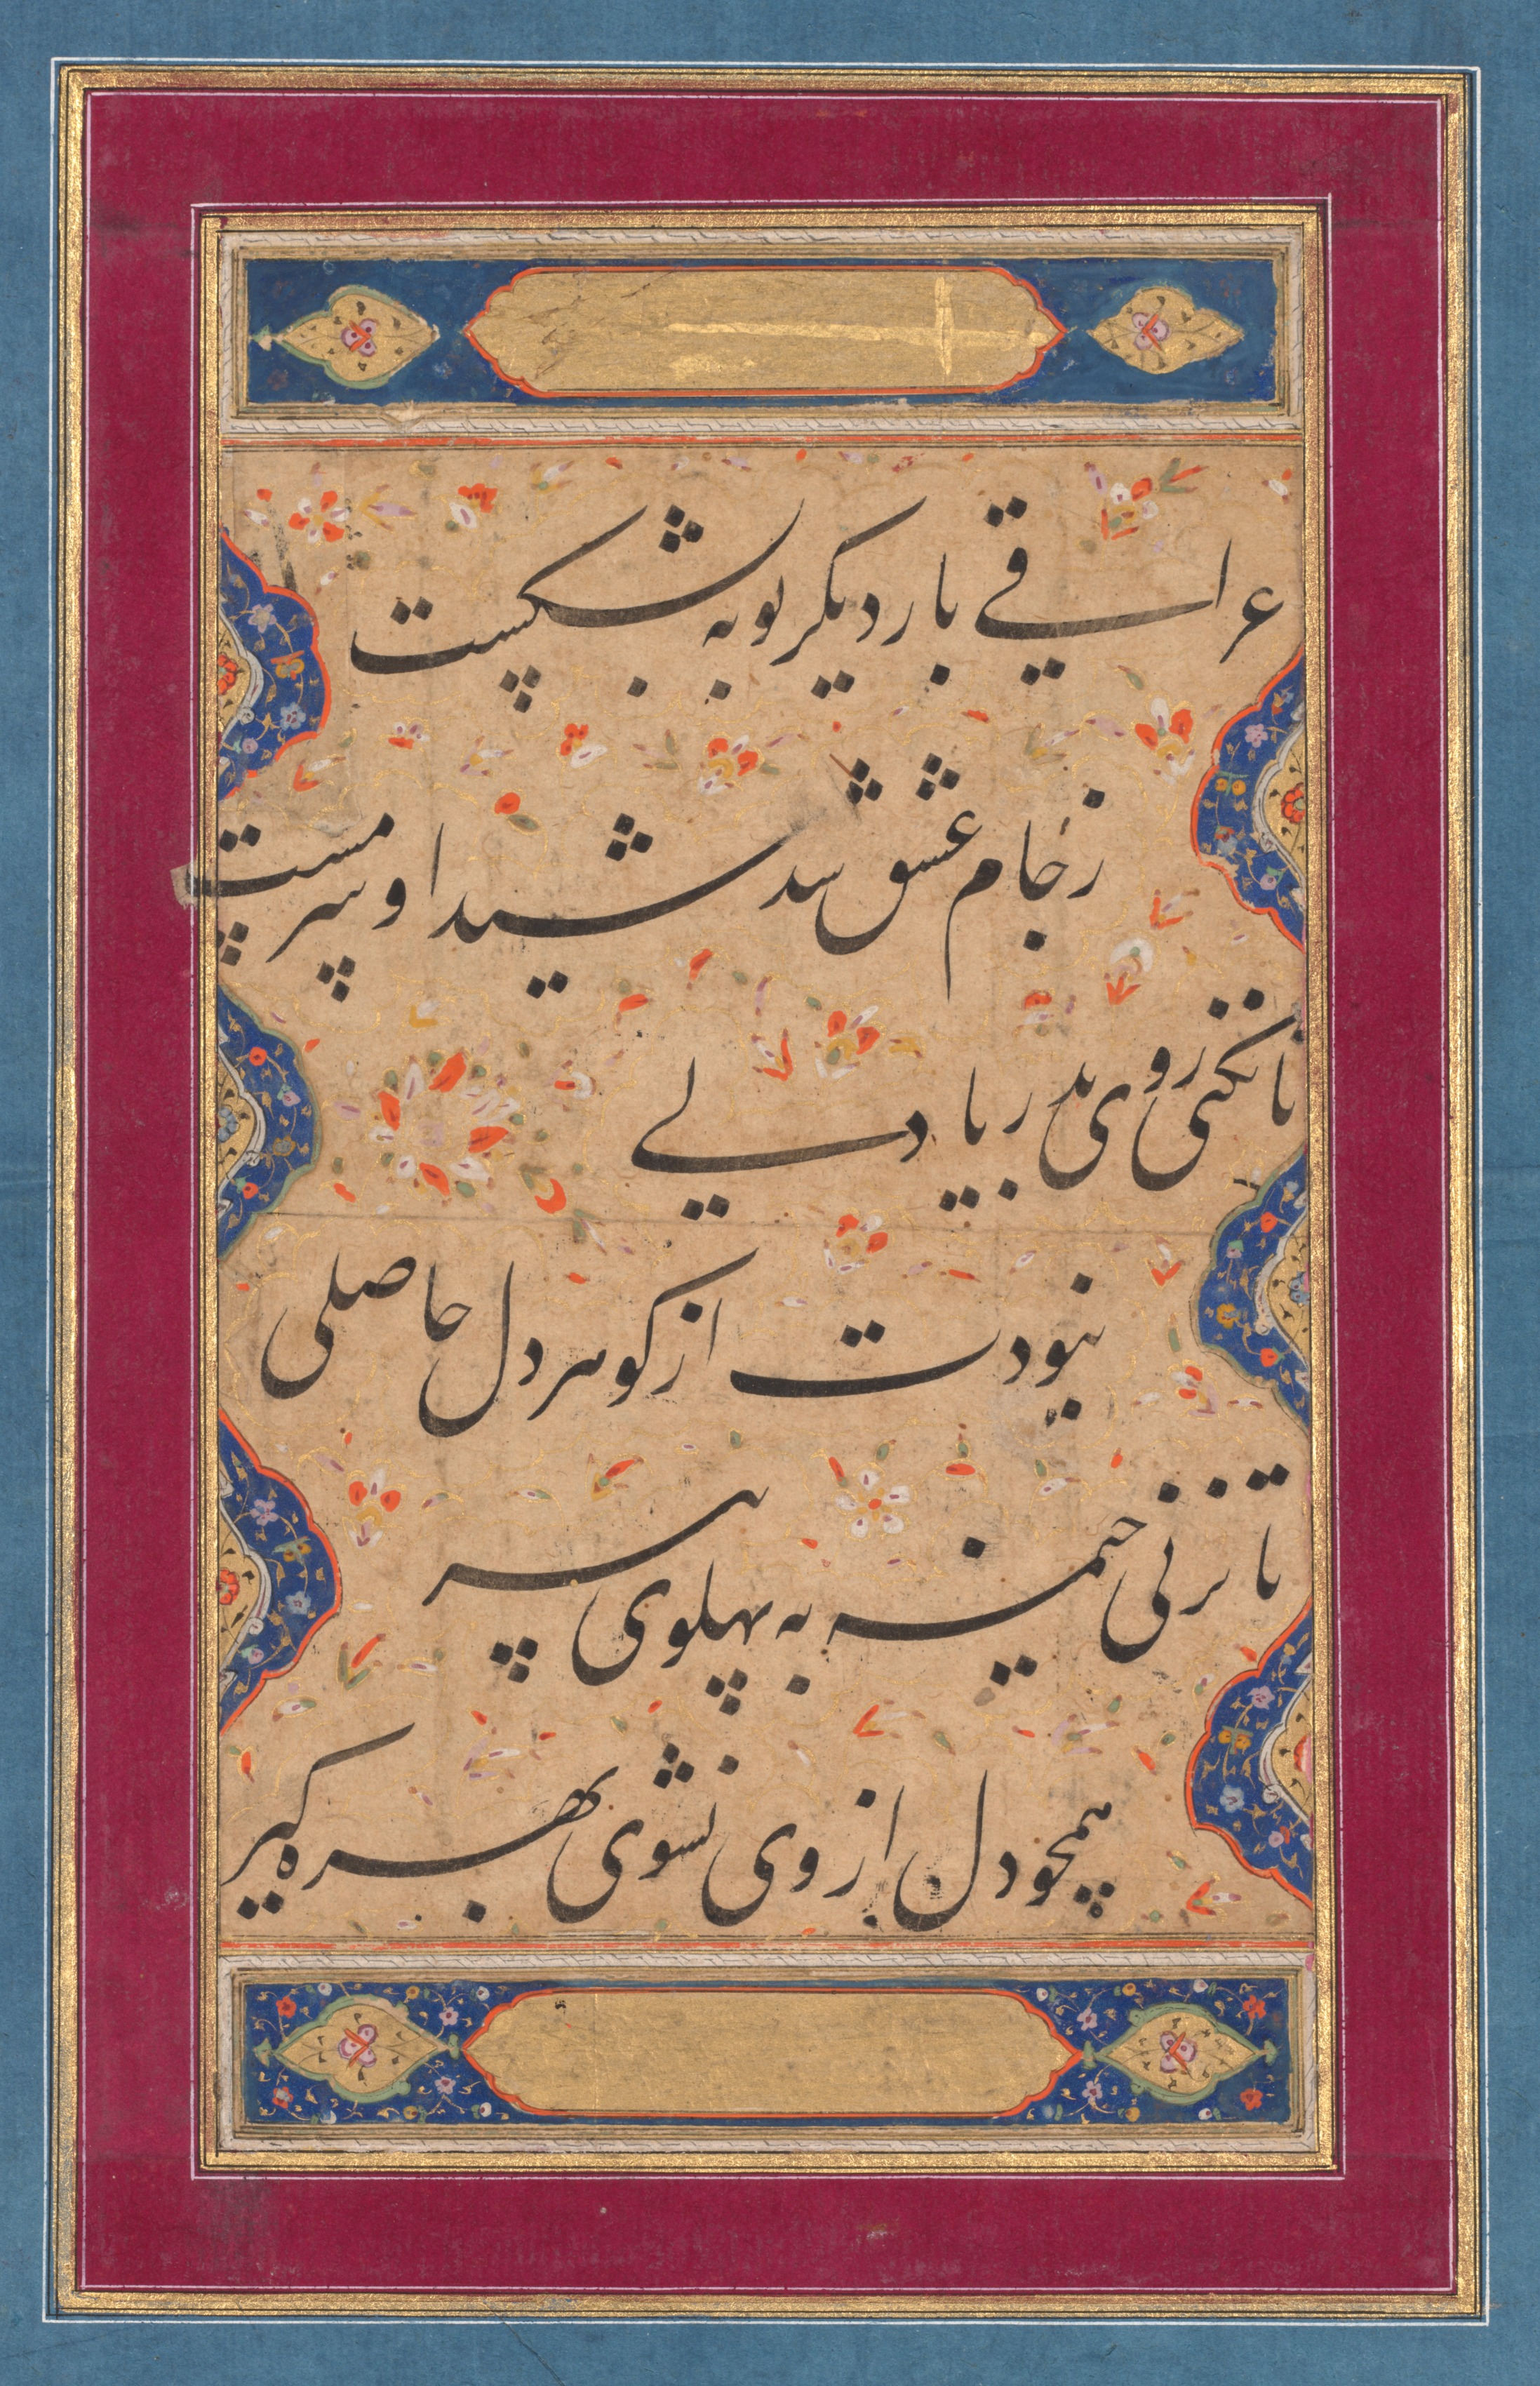 Calligraphy from a ghazal of Fakhr al-Din Iraqi (Persian, 1213–1289) and a verse from the Tuhfat al-ahrar (The Gift of the Free) of Abd al-Rahman Jami (verso)